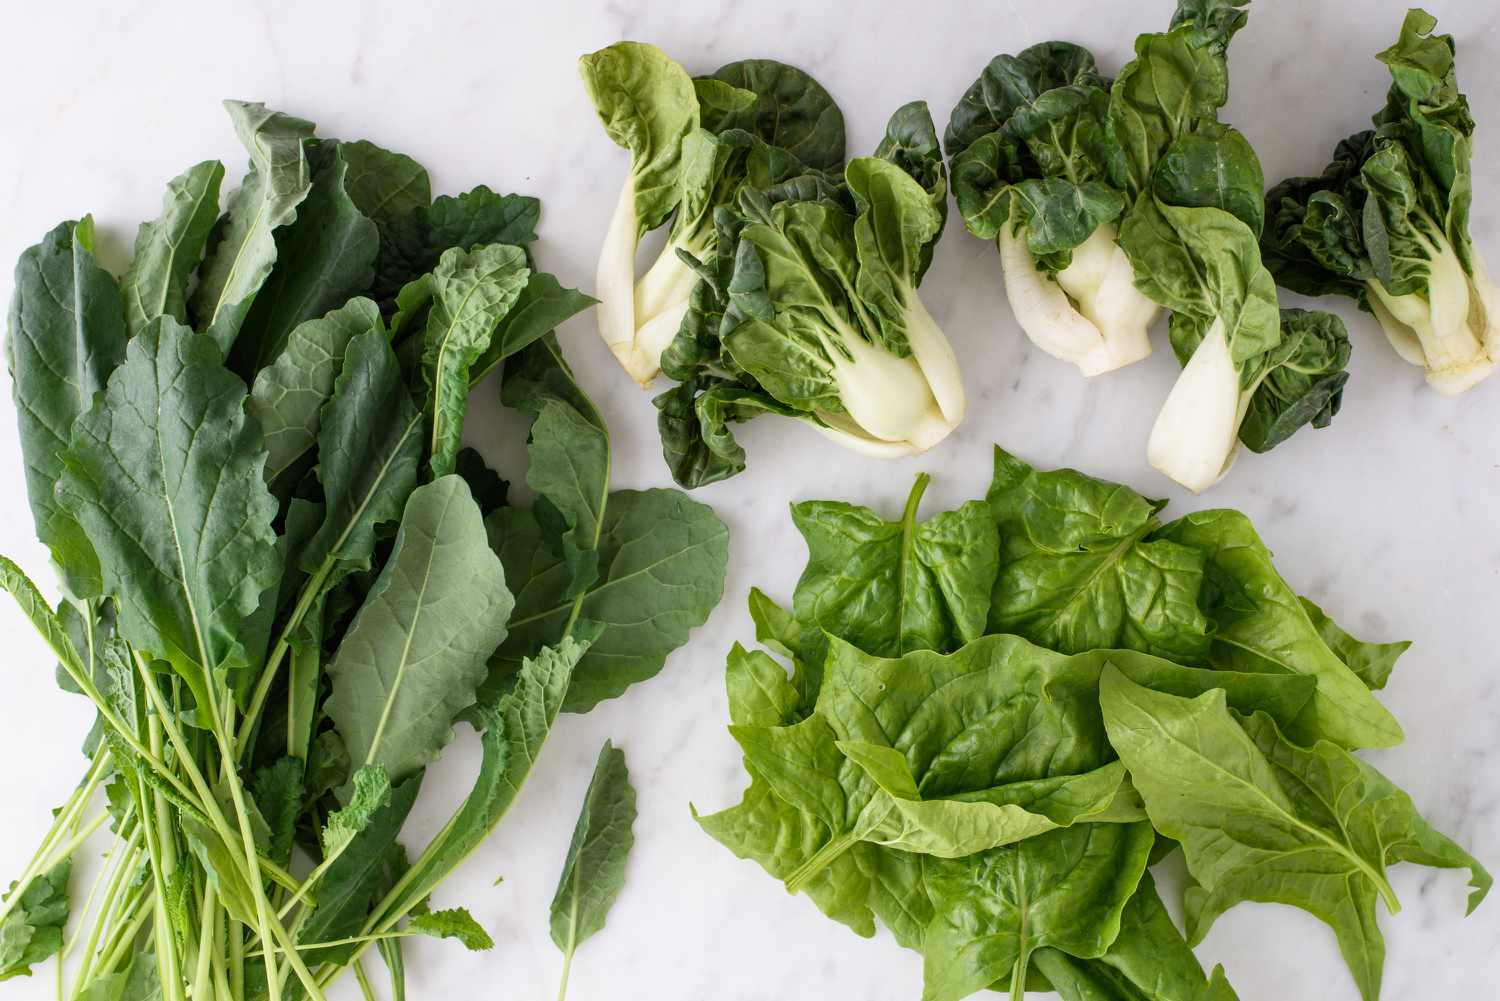 Discover the nutritional wonders of leafy greens at LeafyGreensHub. Learn how these powerhouses of nutrients can boost your health and vitality. Find tips, recipes, and more for a greener, healthier lifestyle.